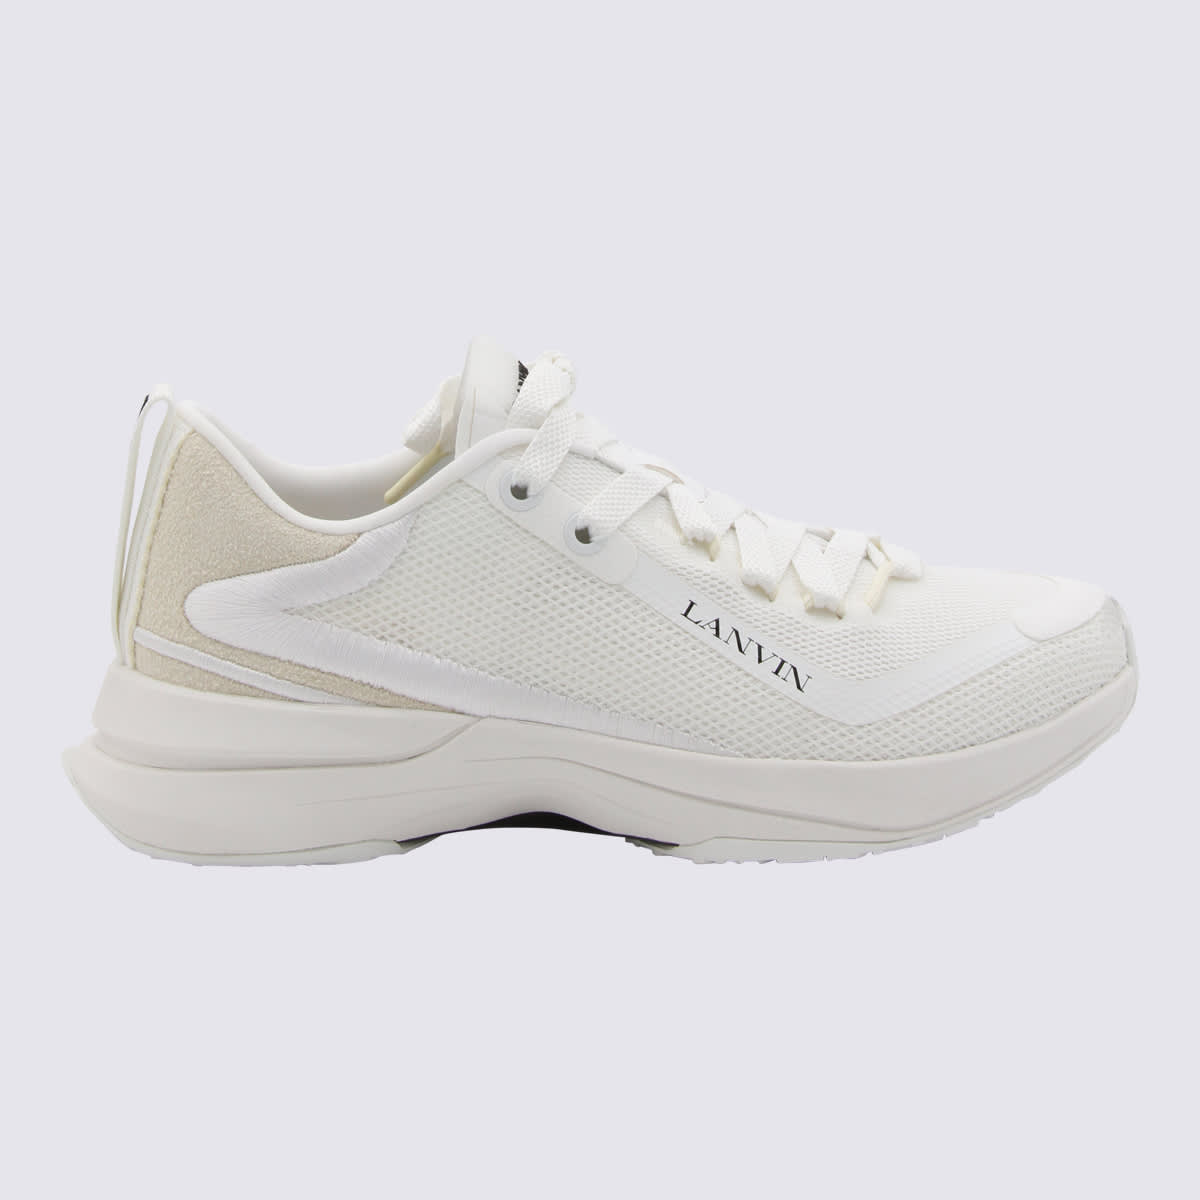 Lanvin White Leather Sneakers